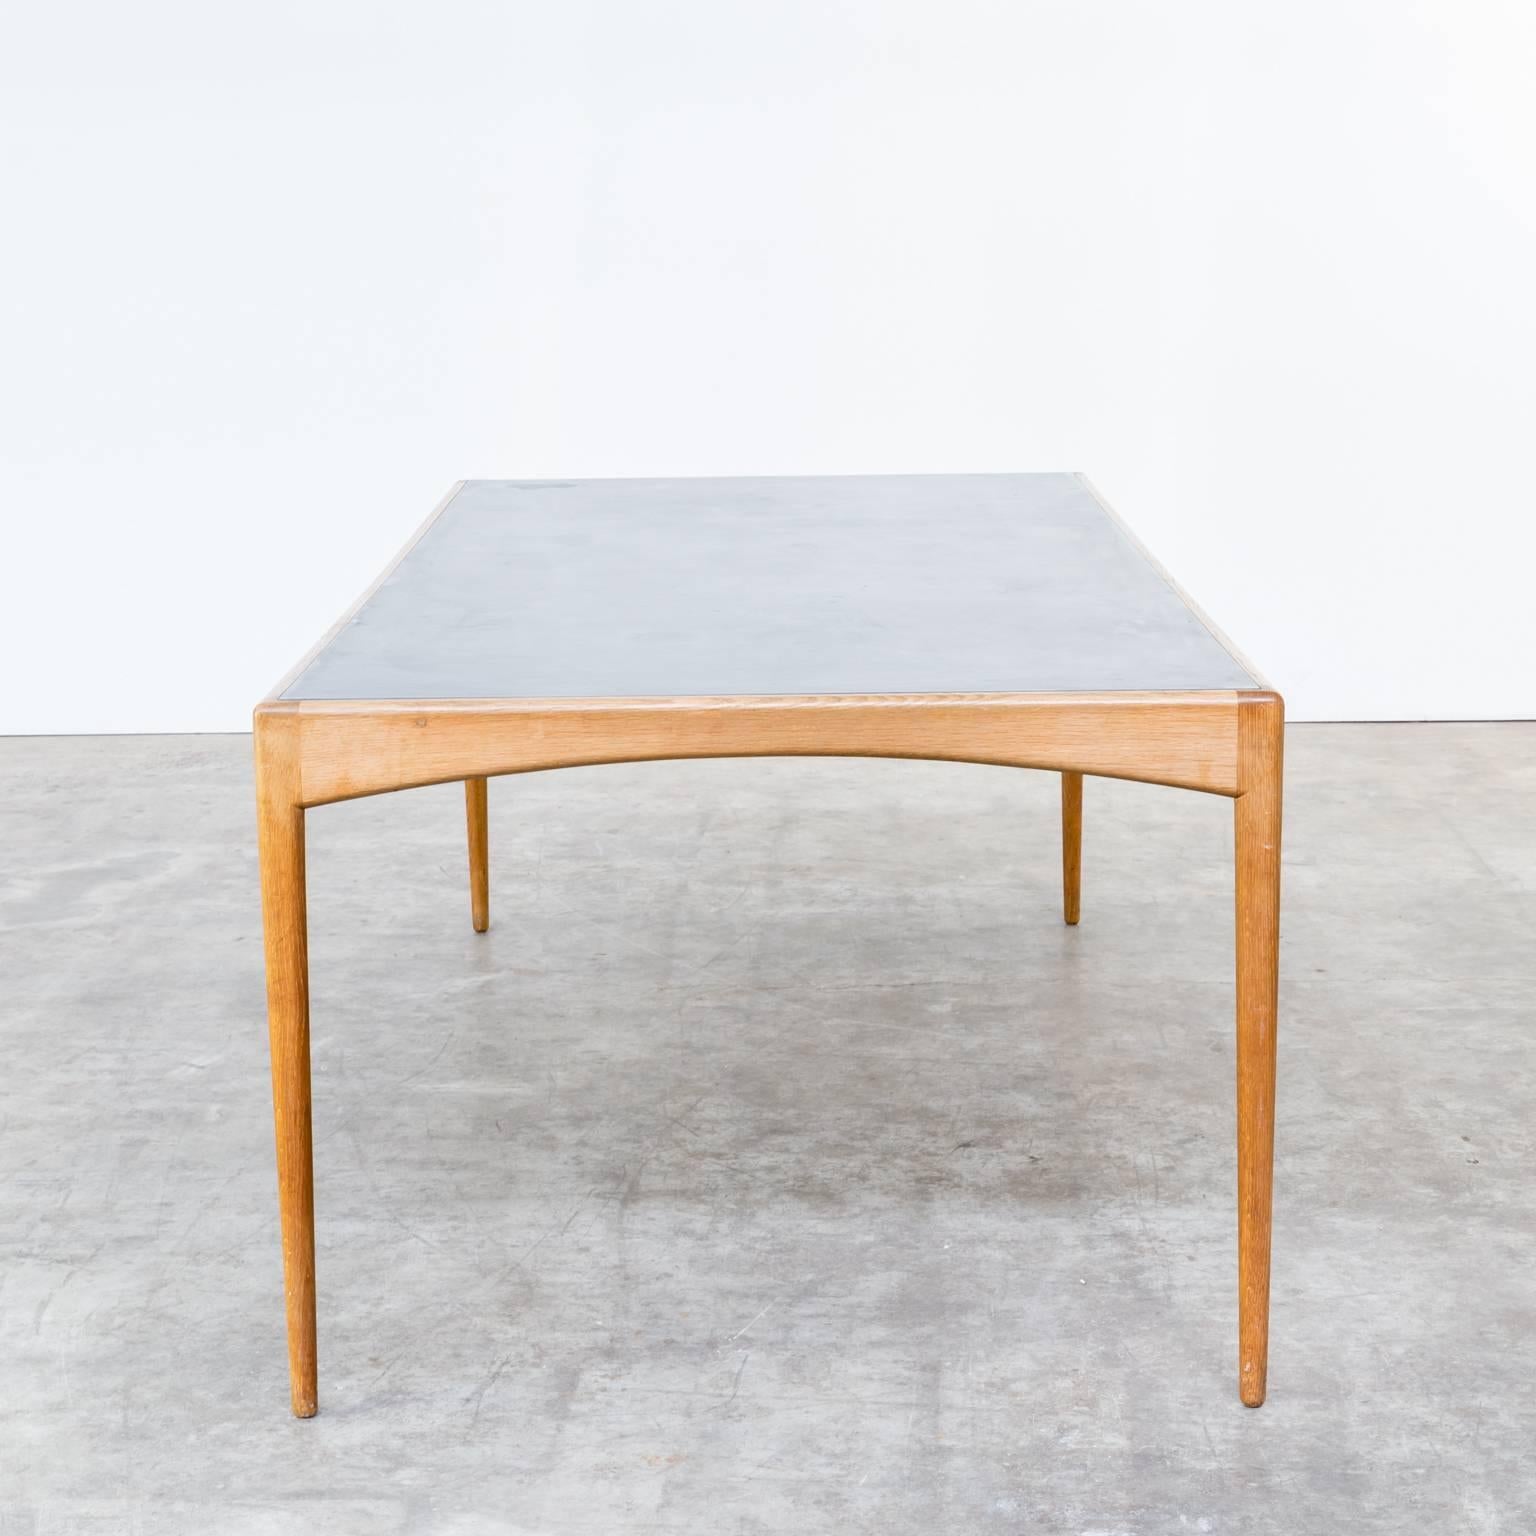 1960s Kristian Solmer Vedel dining table for Soren Willadsen. Special 66cm height, with leatherette grey tabletop. Good condition, wear consistant with age and use. Dimensions: 180cm (W) x 90cm (D) x 66cm (H).